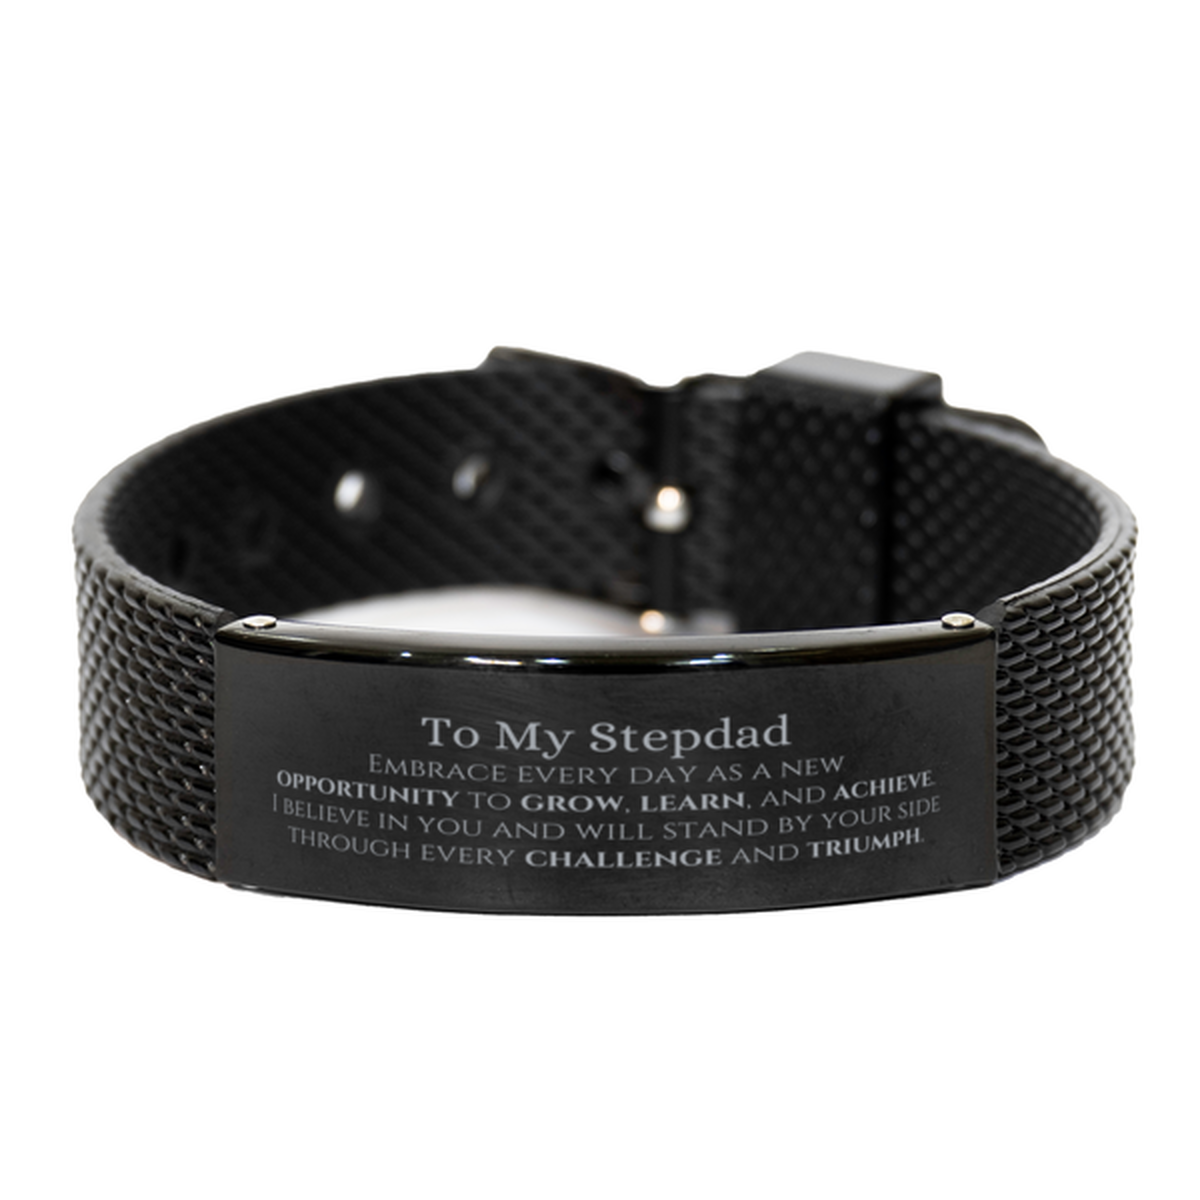 To My Stepdad Gifts, I believe in you and will stand by your side, Inspirational Black Shark Mesh Bracelet For Stepdad, Birthday Christmas Motivational Stepdad Gifts